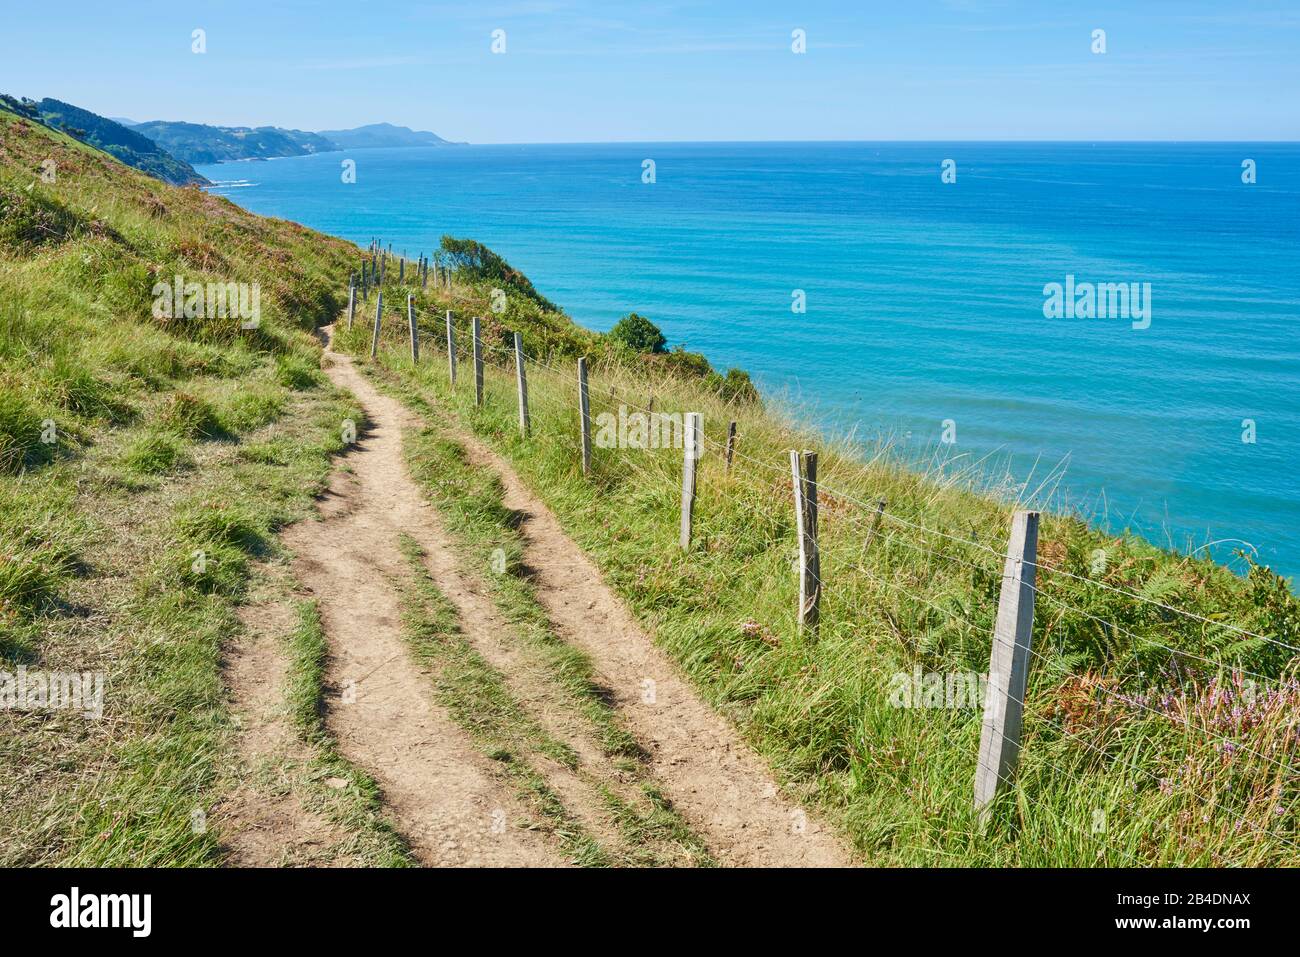 Landscape, footpath, Way of St. james, Geopark Costa Vasca between Zumaia and Itxaspe, Basque Country, Spain Stock Photo